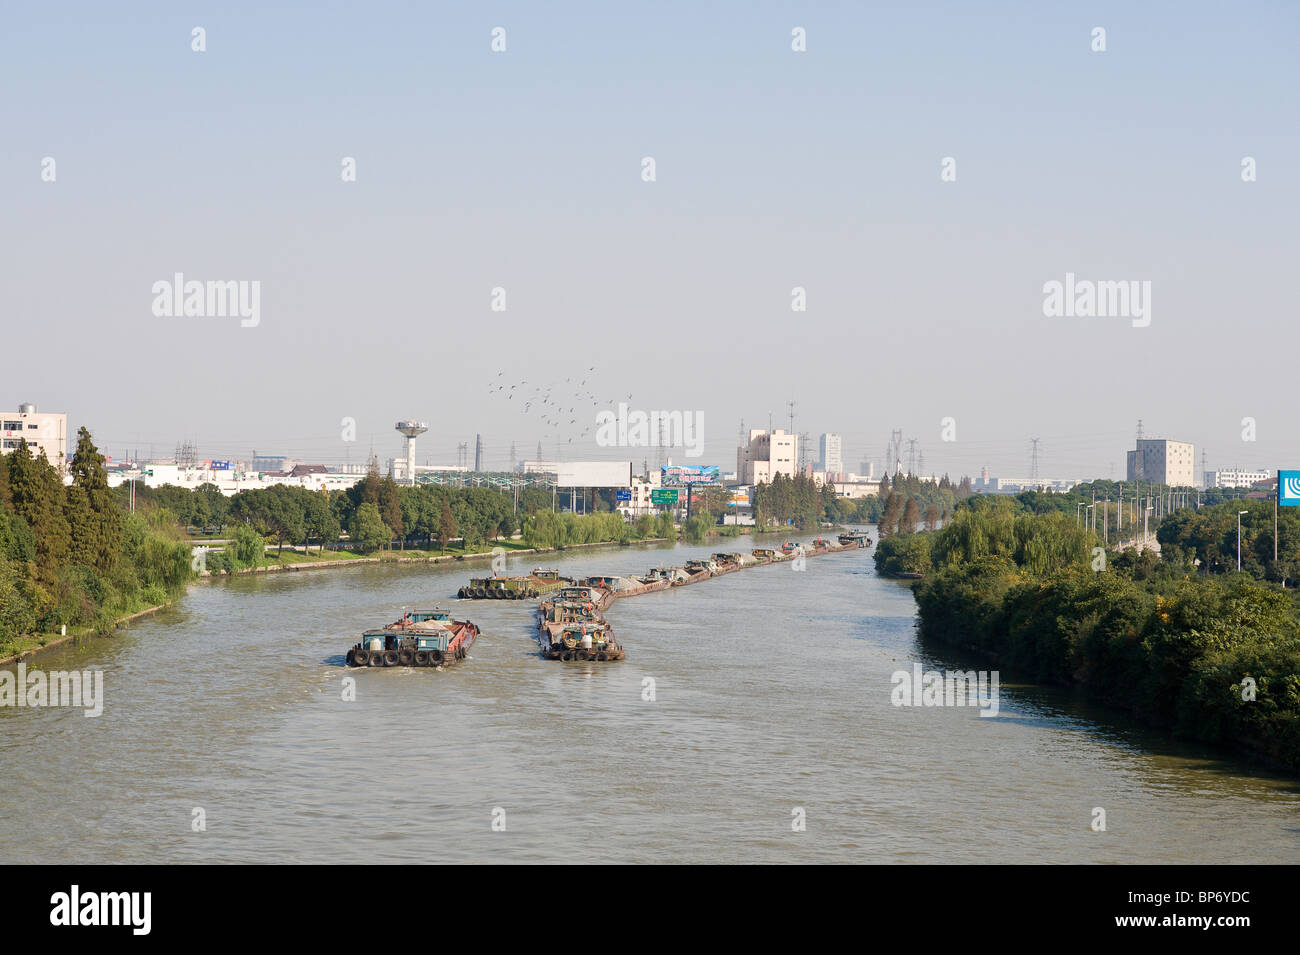 China, Suzhou. Barges on the Grand Canal. Stock Photo